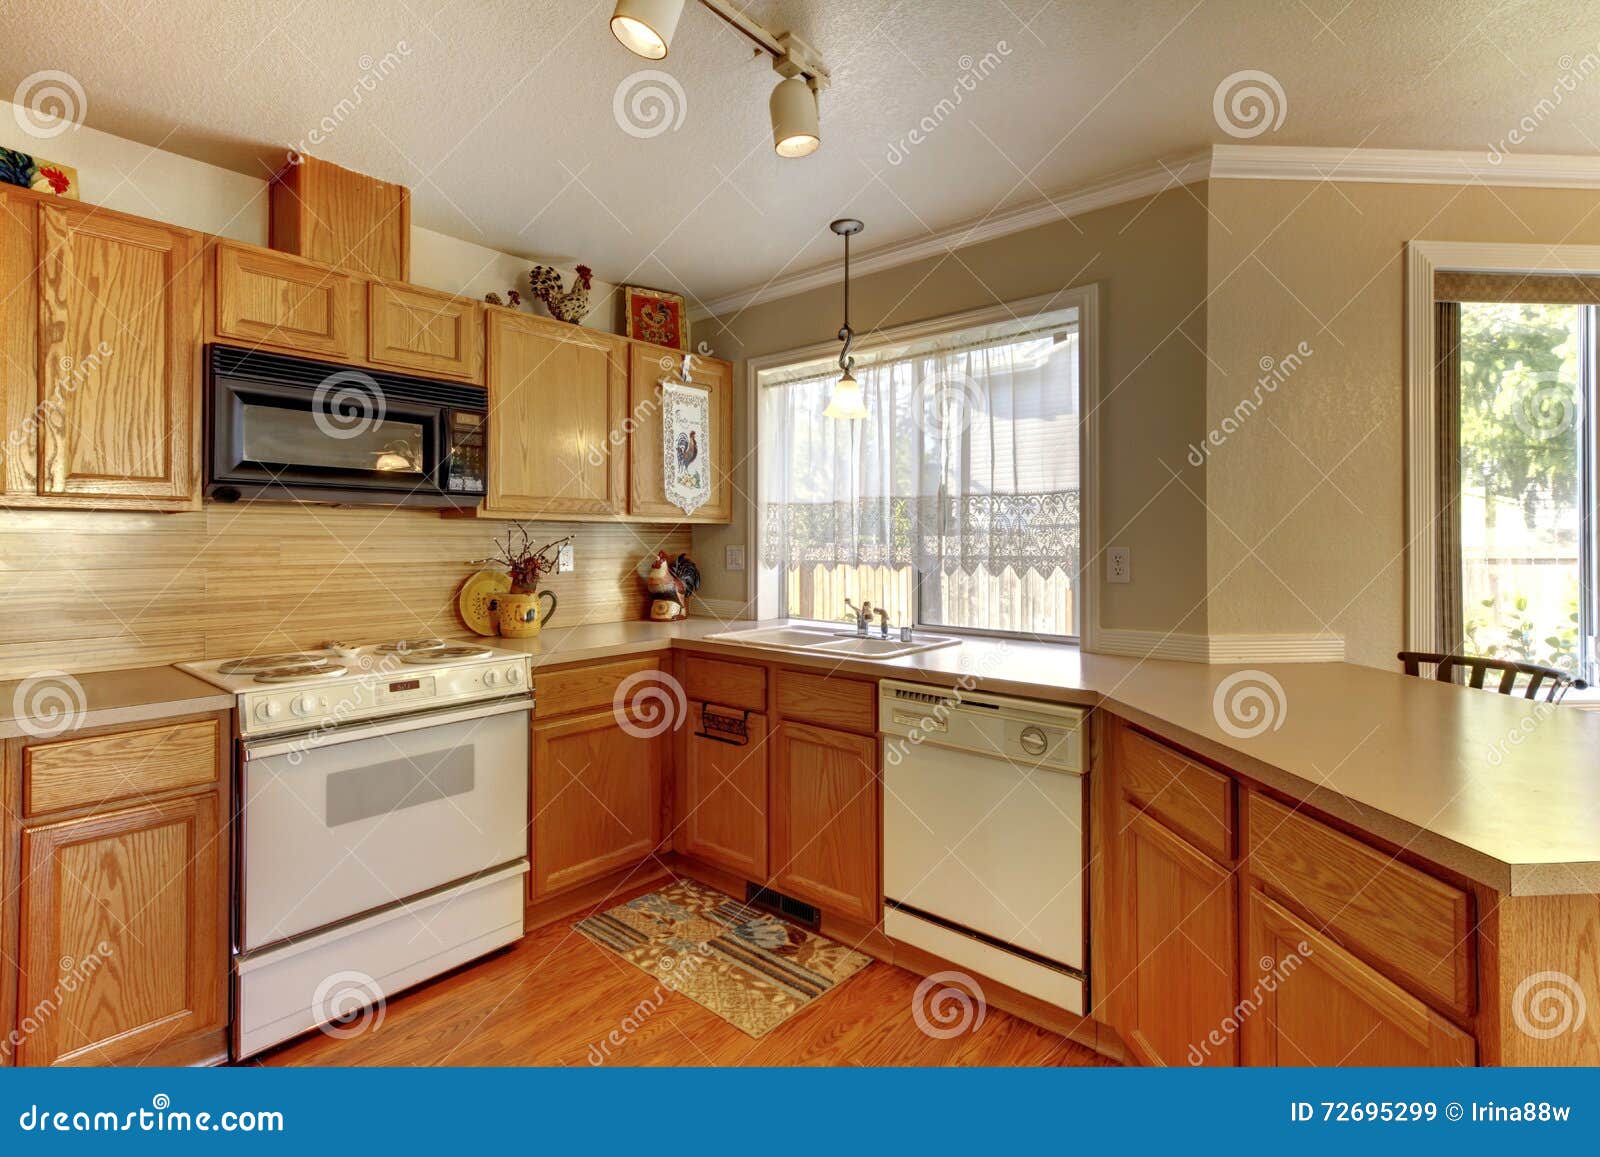 American Typical Kitchen Interior With White Appliances Stock